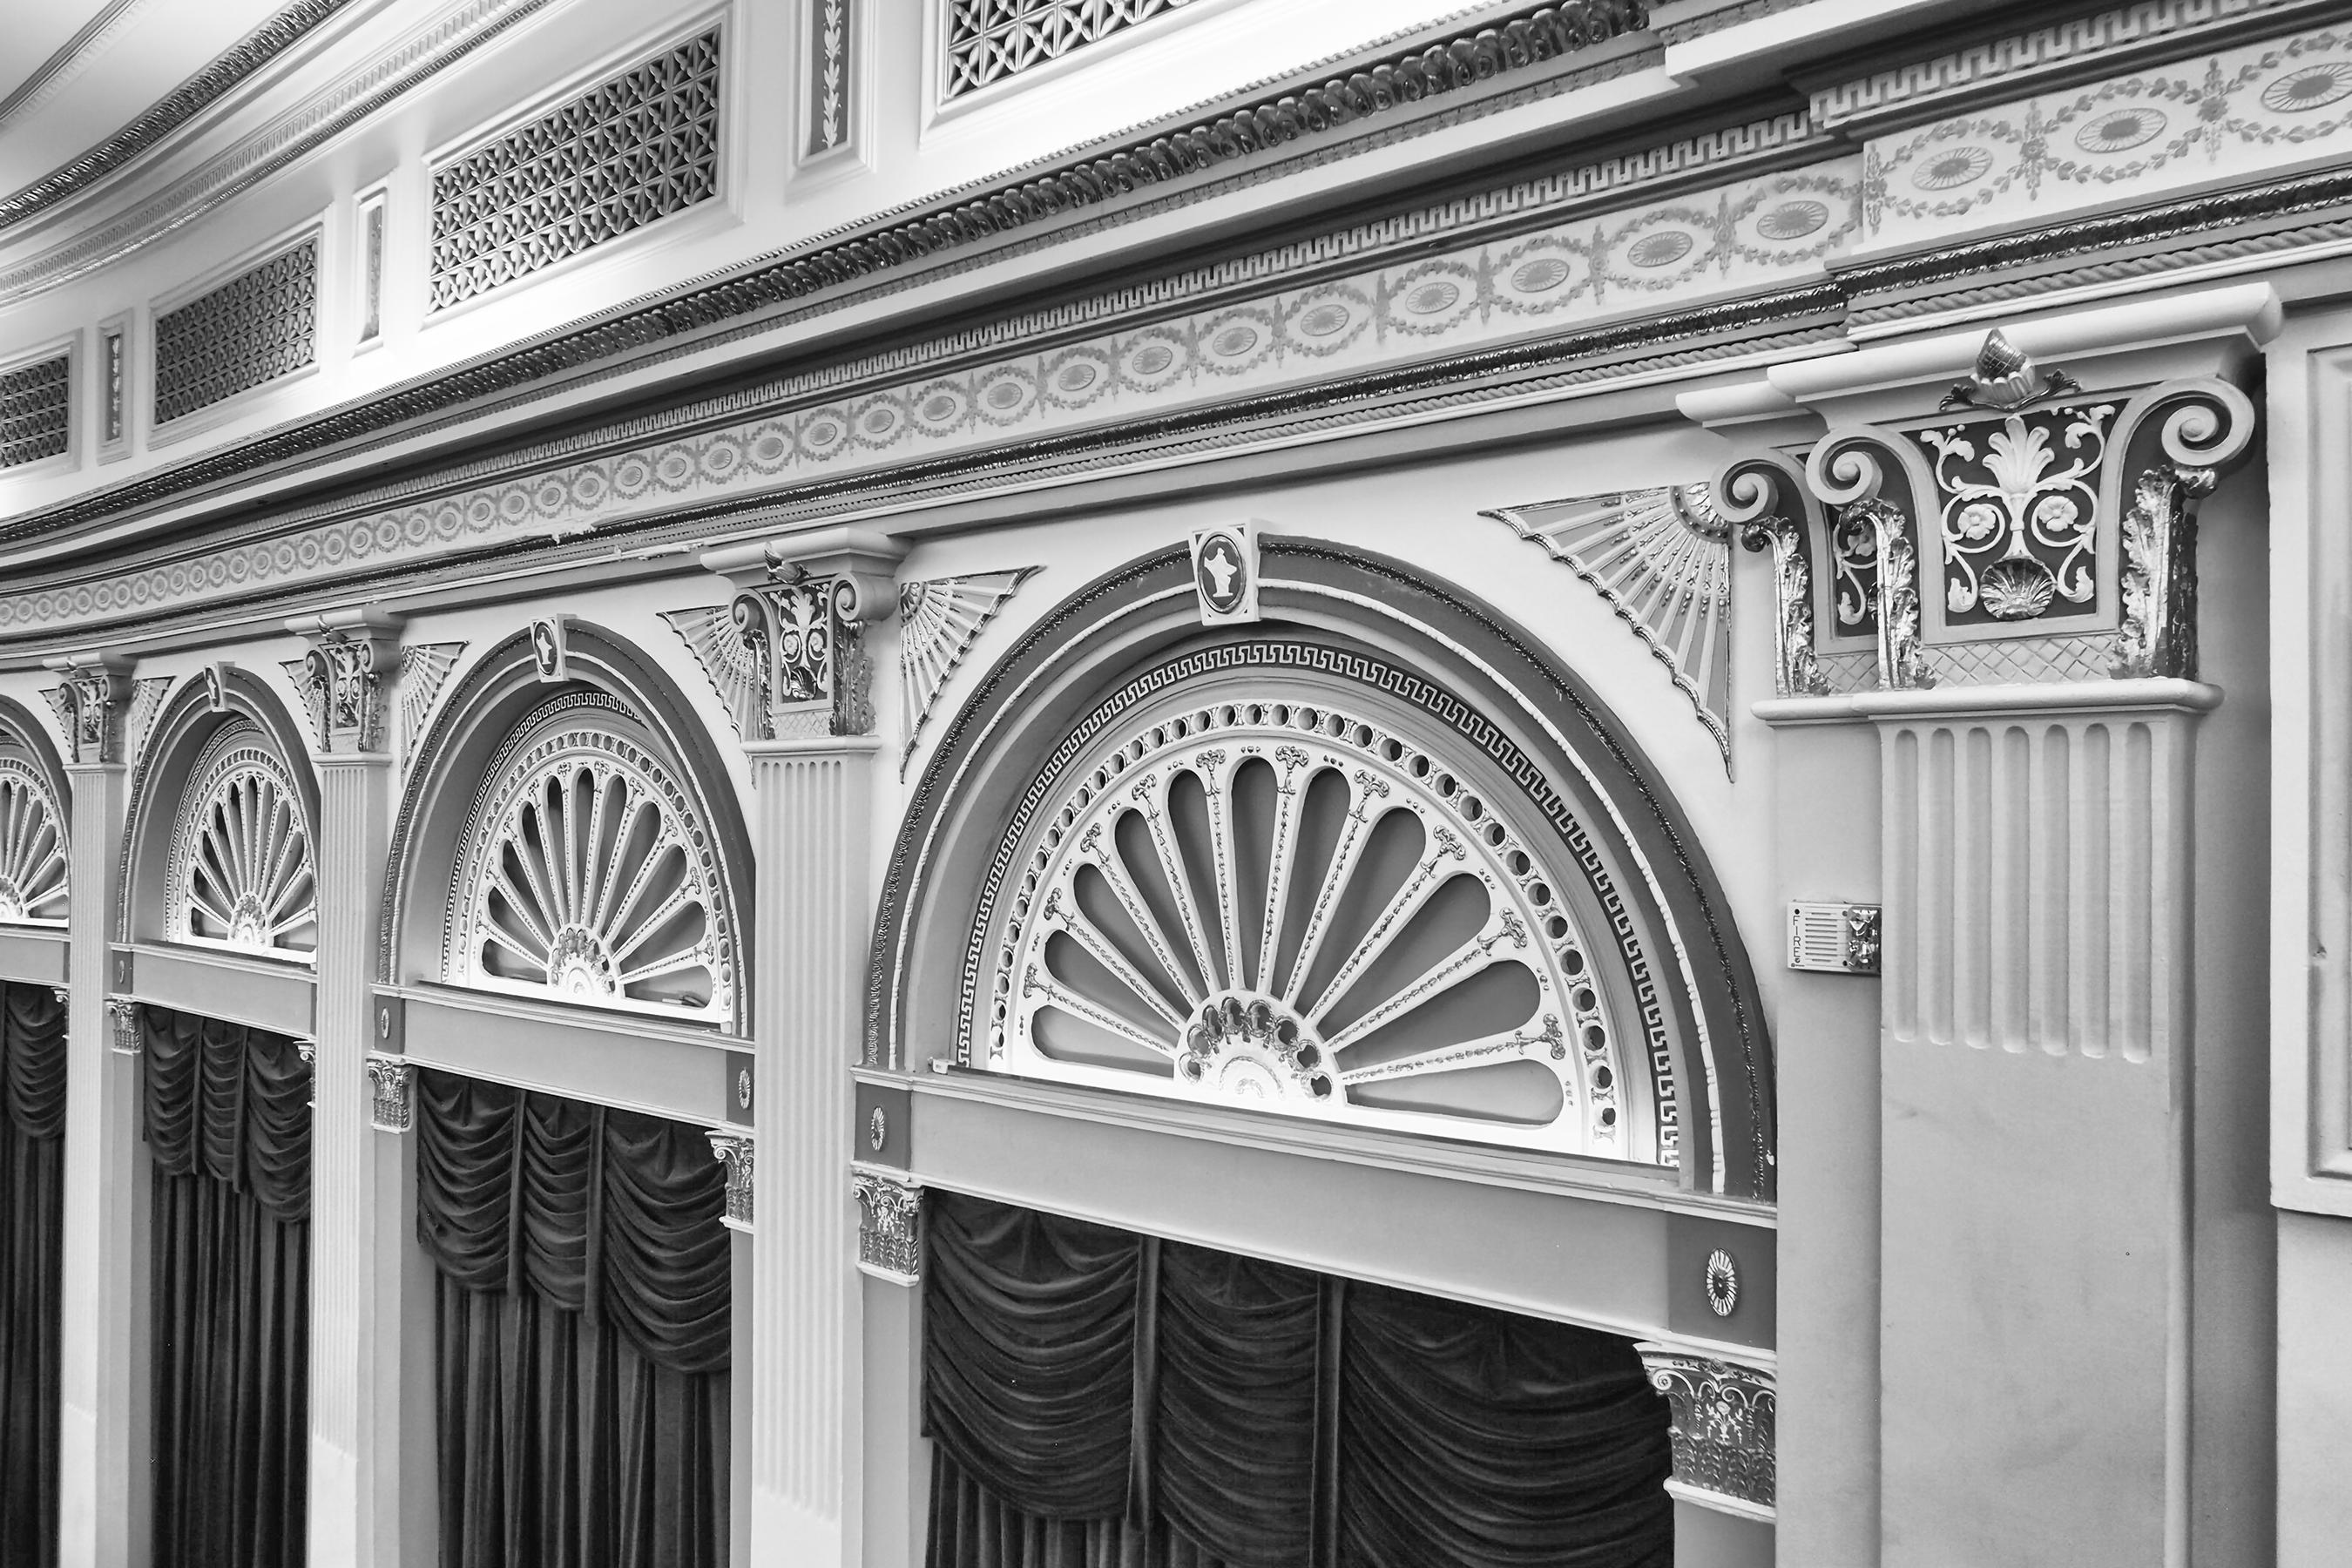 Myrtie Cope Black and White Photograph - "Arches Detail - Lucas Theatre" - architectural photography - Ezra Stoller